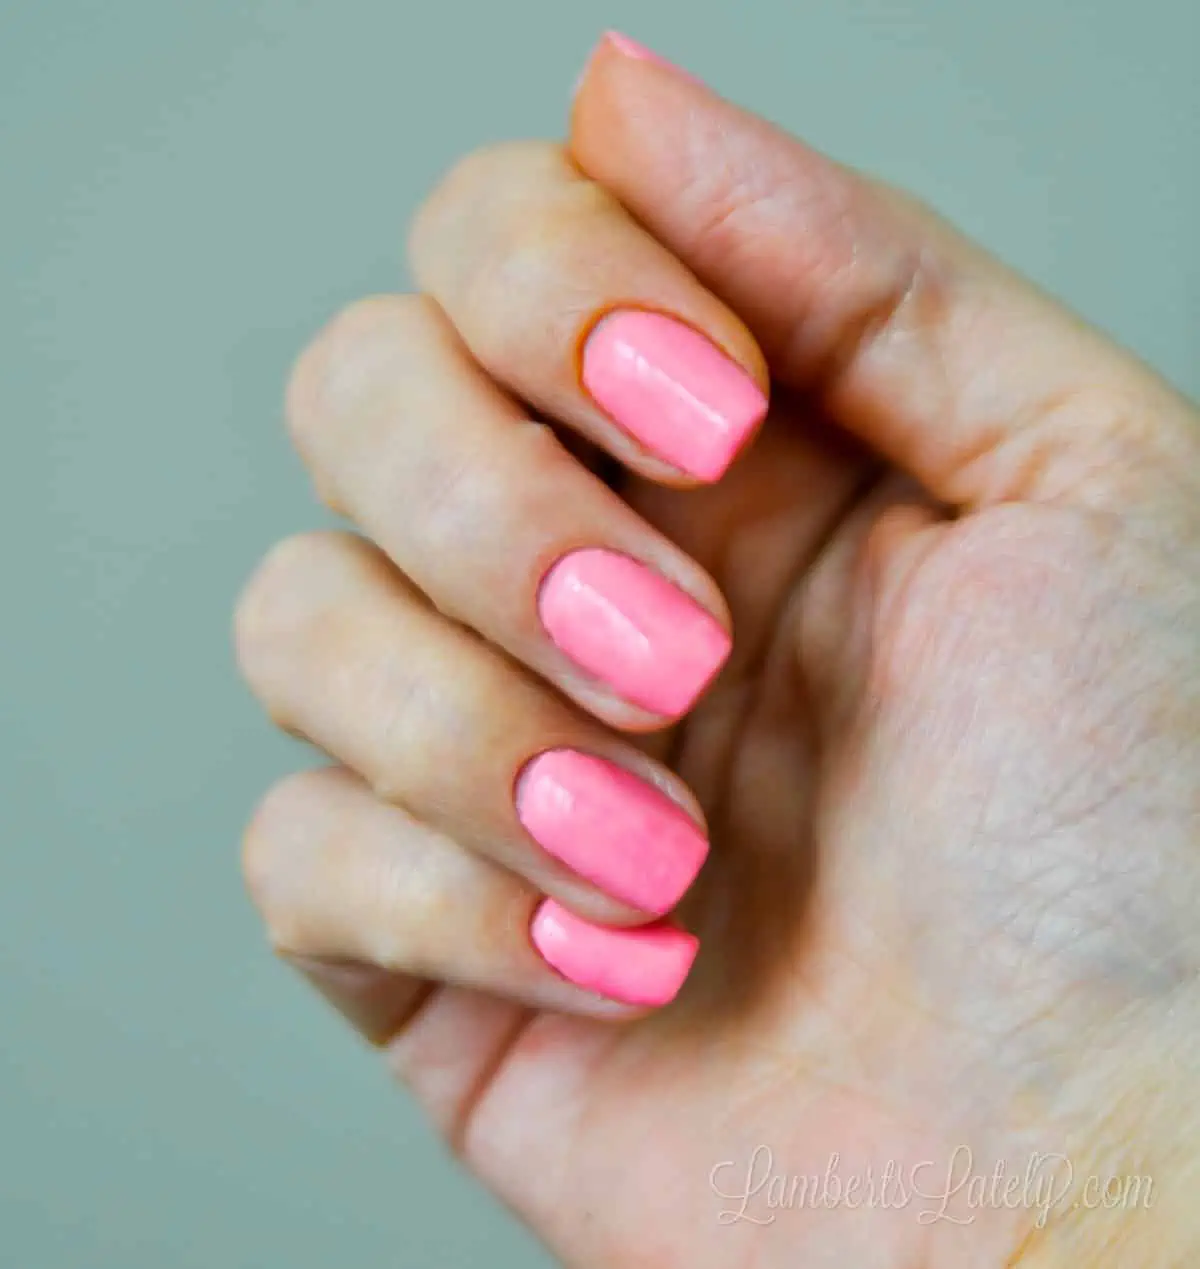 How to Do Dip Nails at Home